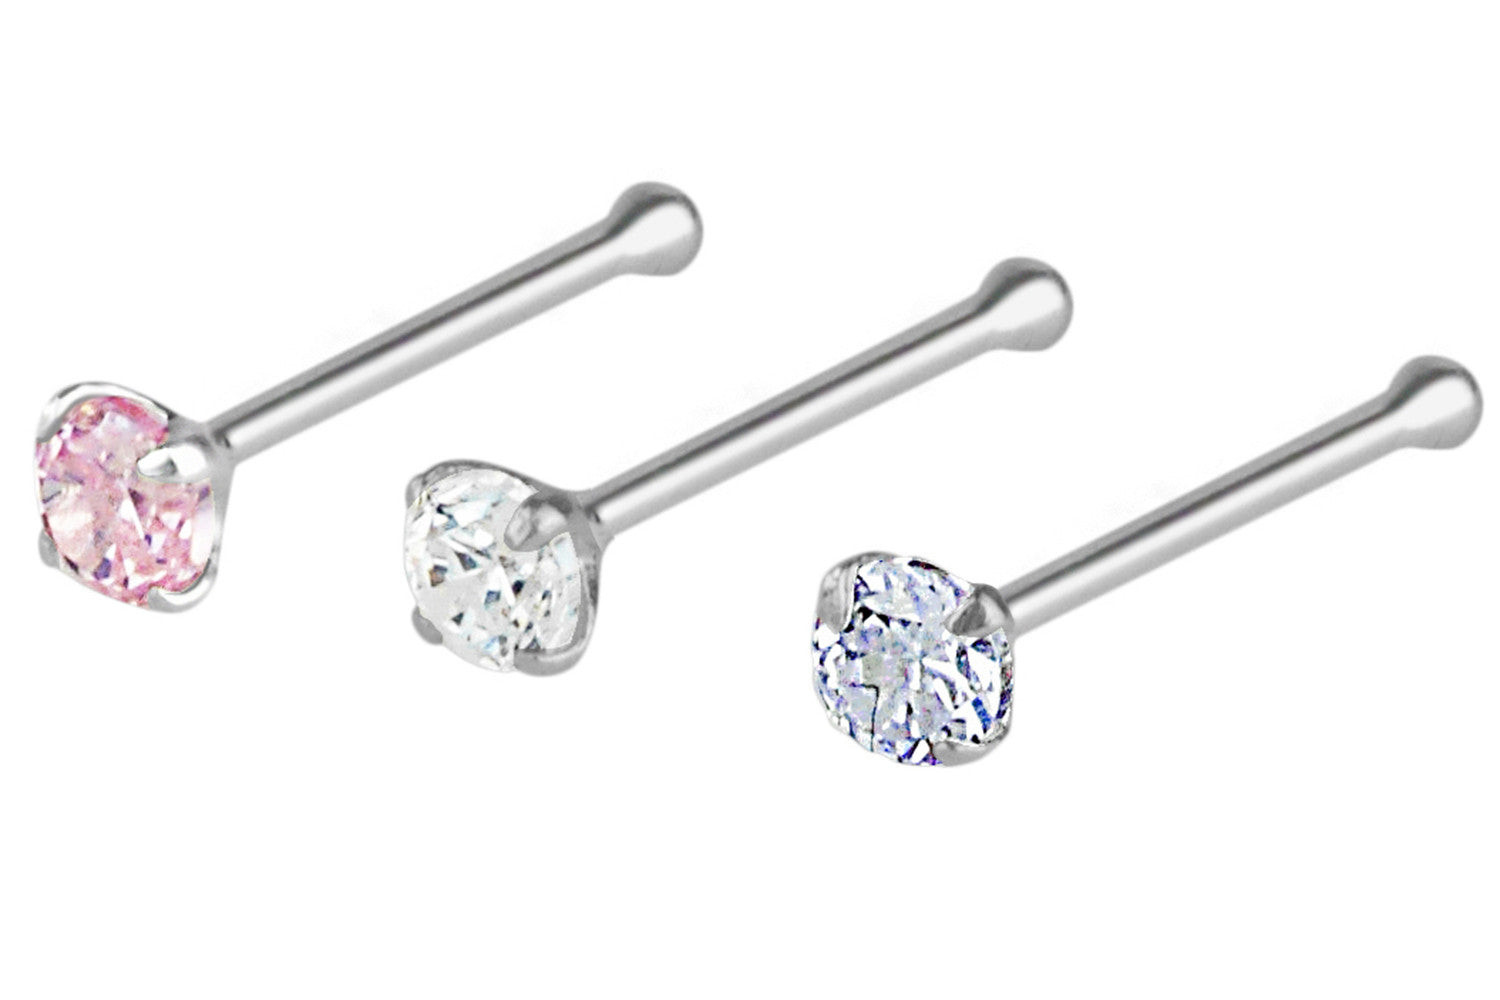 Our 22 gauge nose piercing studs are made with .925 Sterling Silver and Cubic Zirconia simulated diamond crystals. Each crystal is 2 mm in diameter and the studs have a 7 mm wearable shaft. This nose jewelry is hypoallergenic and lead and nickel free.